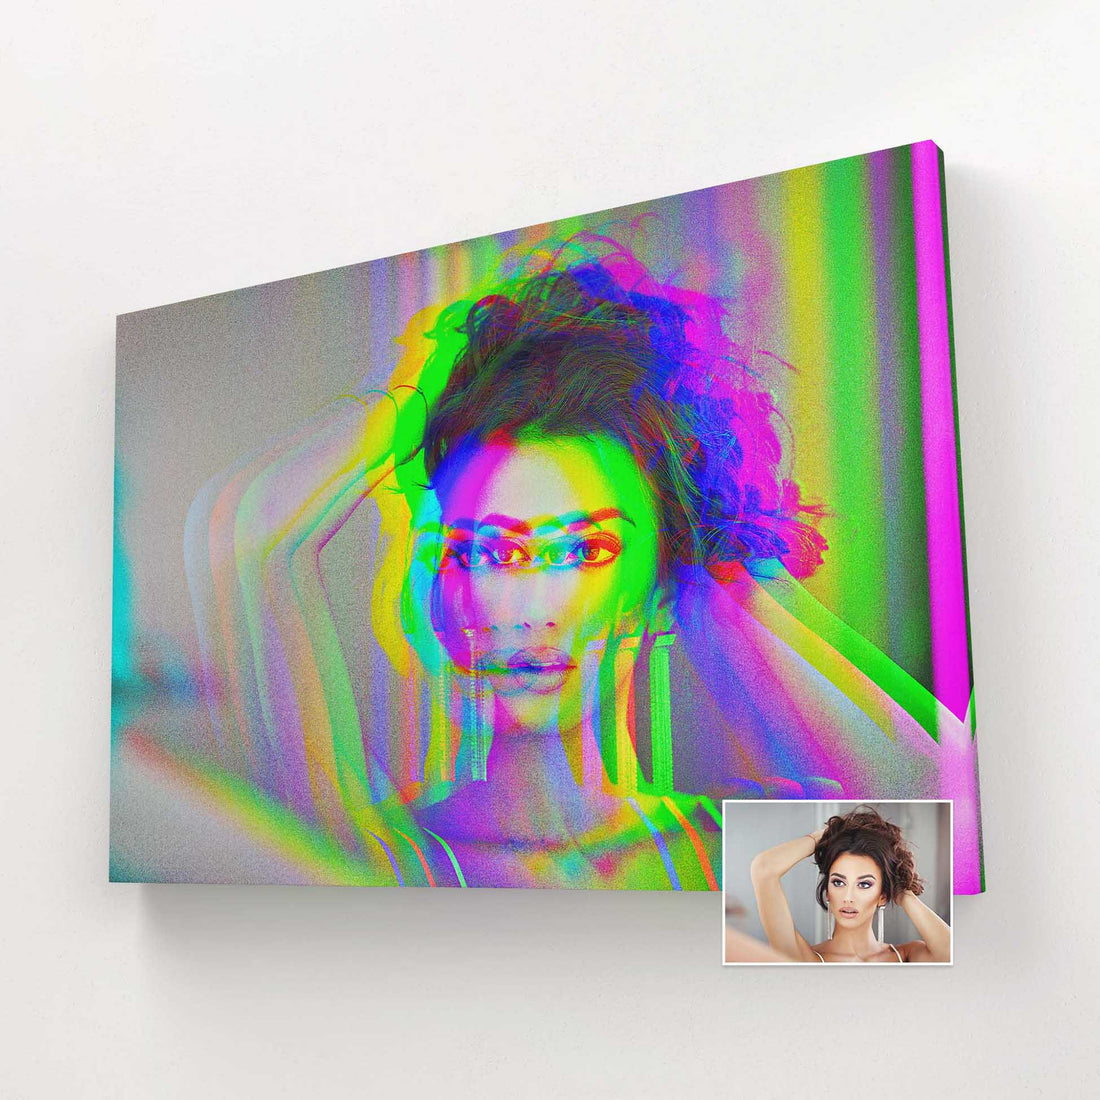 Experience the thrill of personalized anaglyph 3D printing on canvas, where custom details add depth and individuality to the captivating artwork.